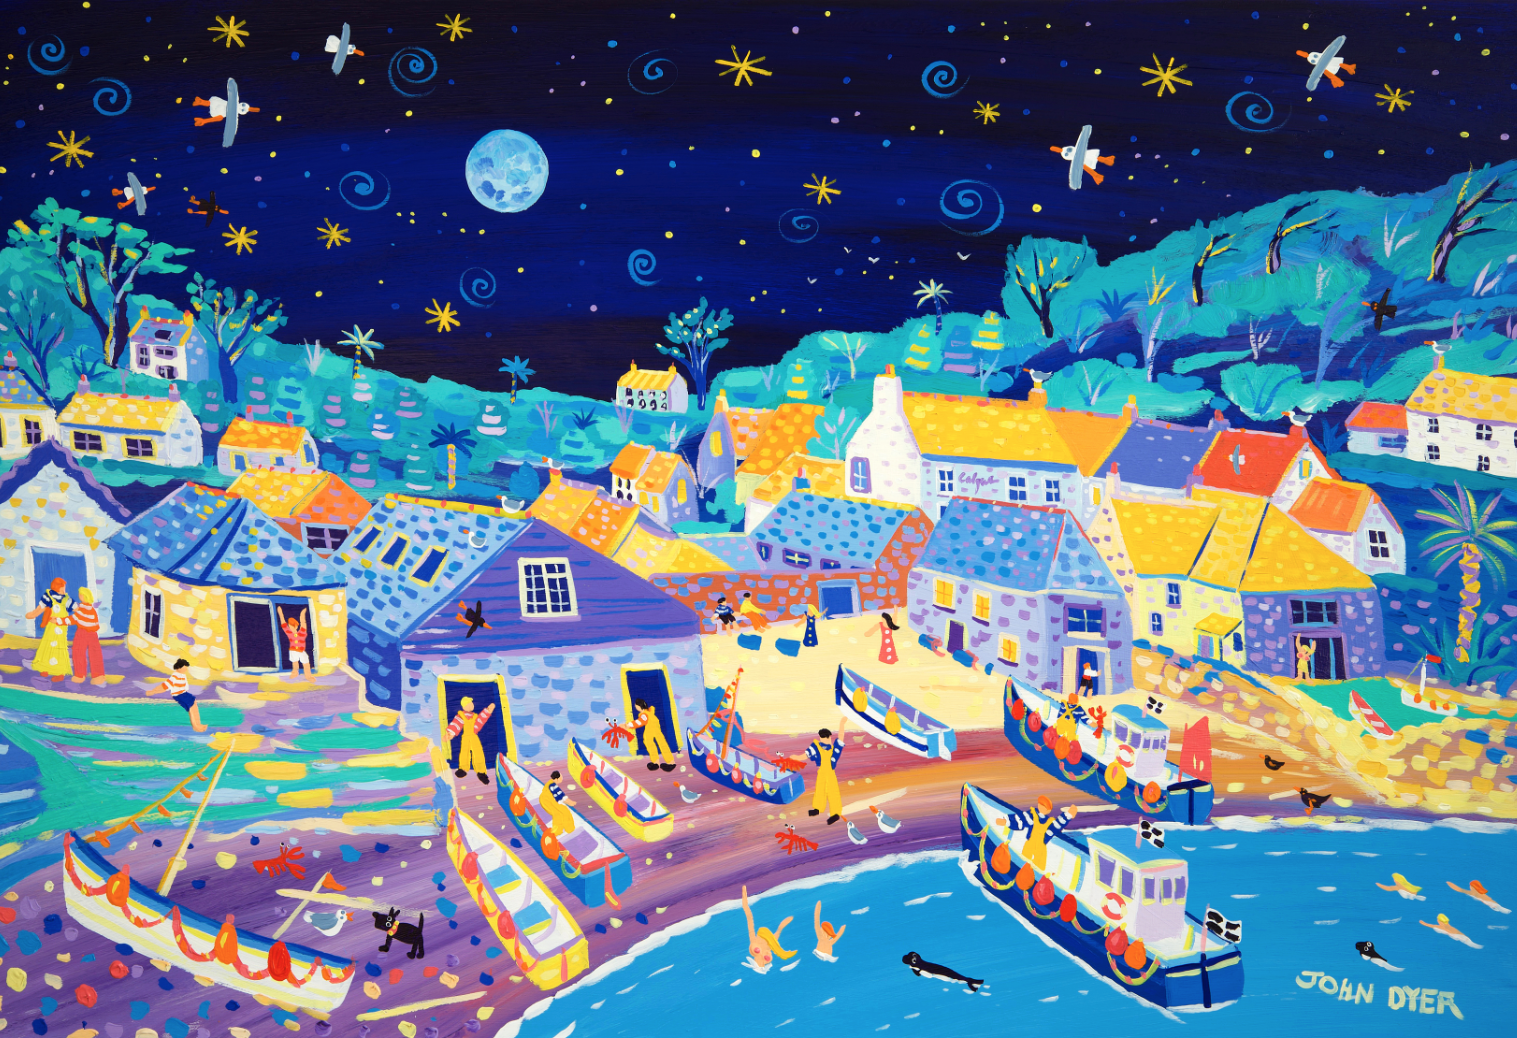 Cornish Art Limited Edition Print by John Dyer. 'Moonlit Skinny Dippers, Cadgwith'. Cornwall Art Gallery Print